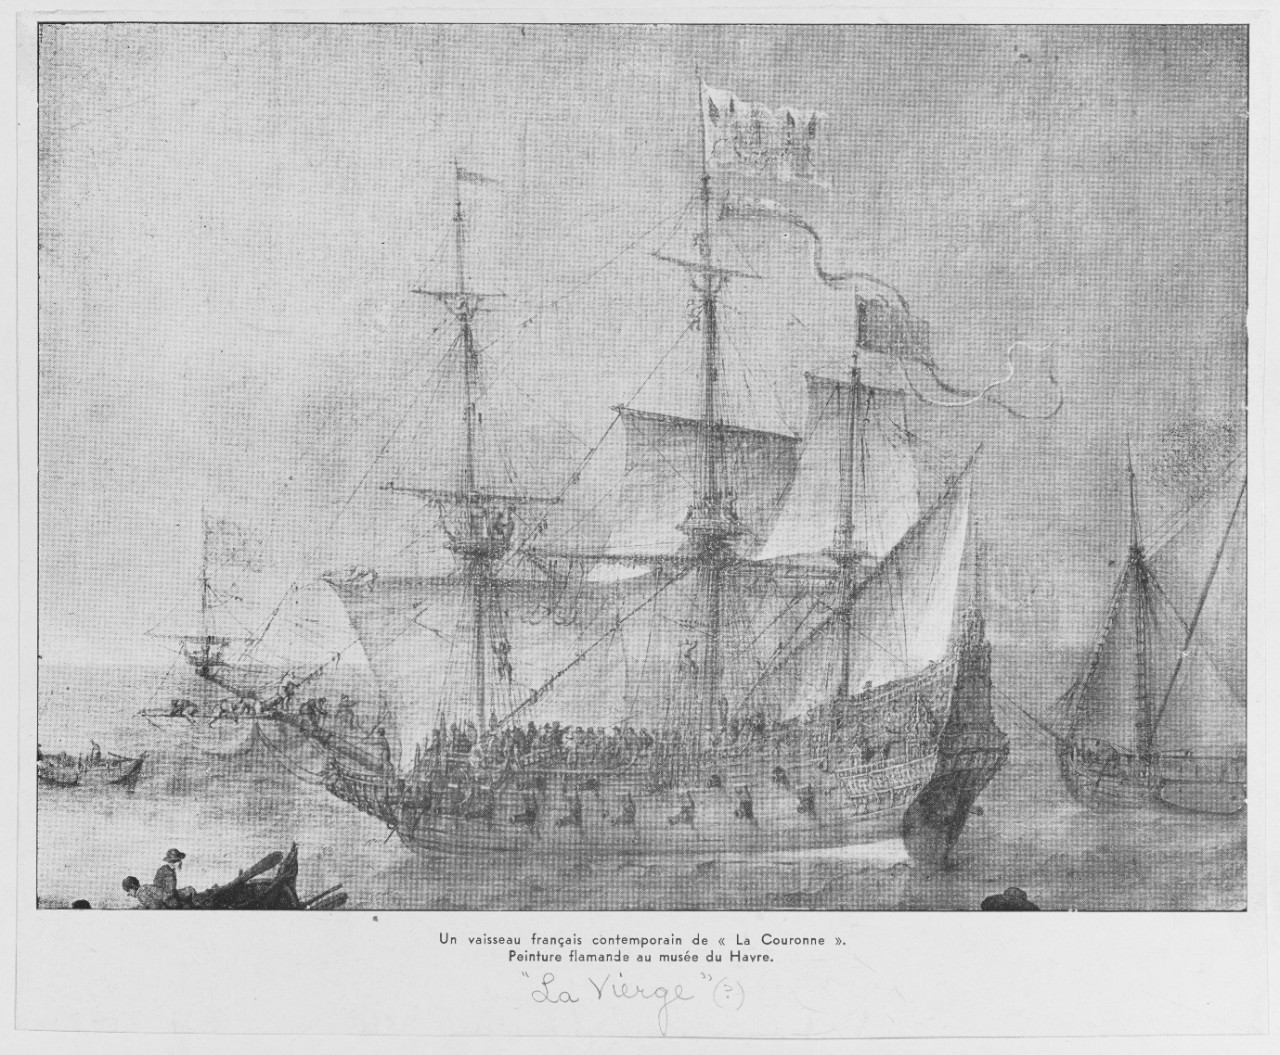 VIERGE, French ship